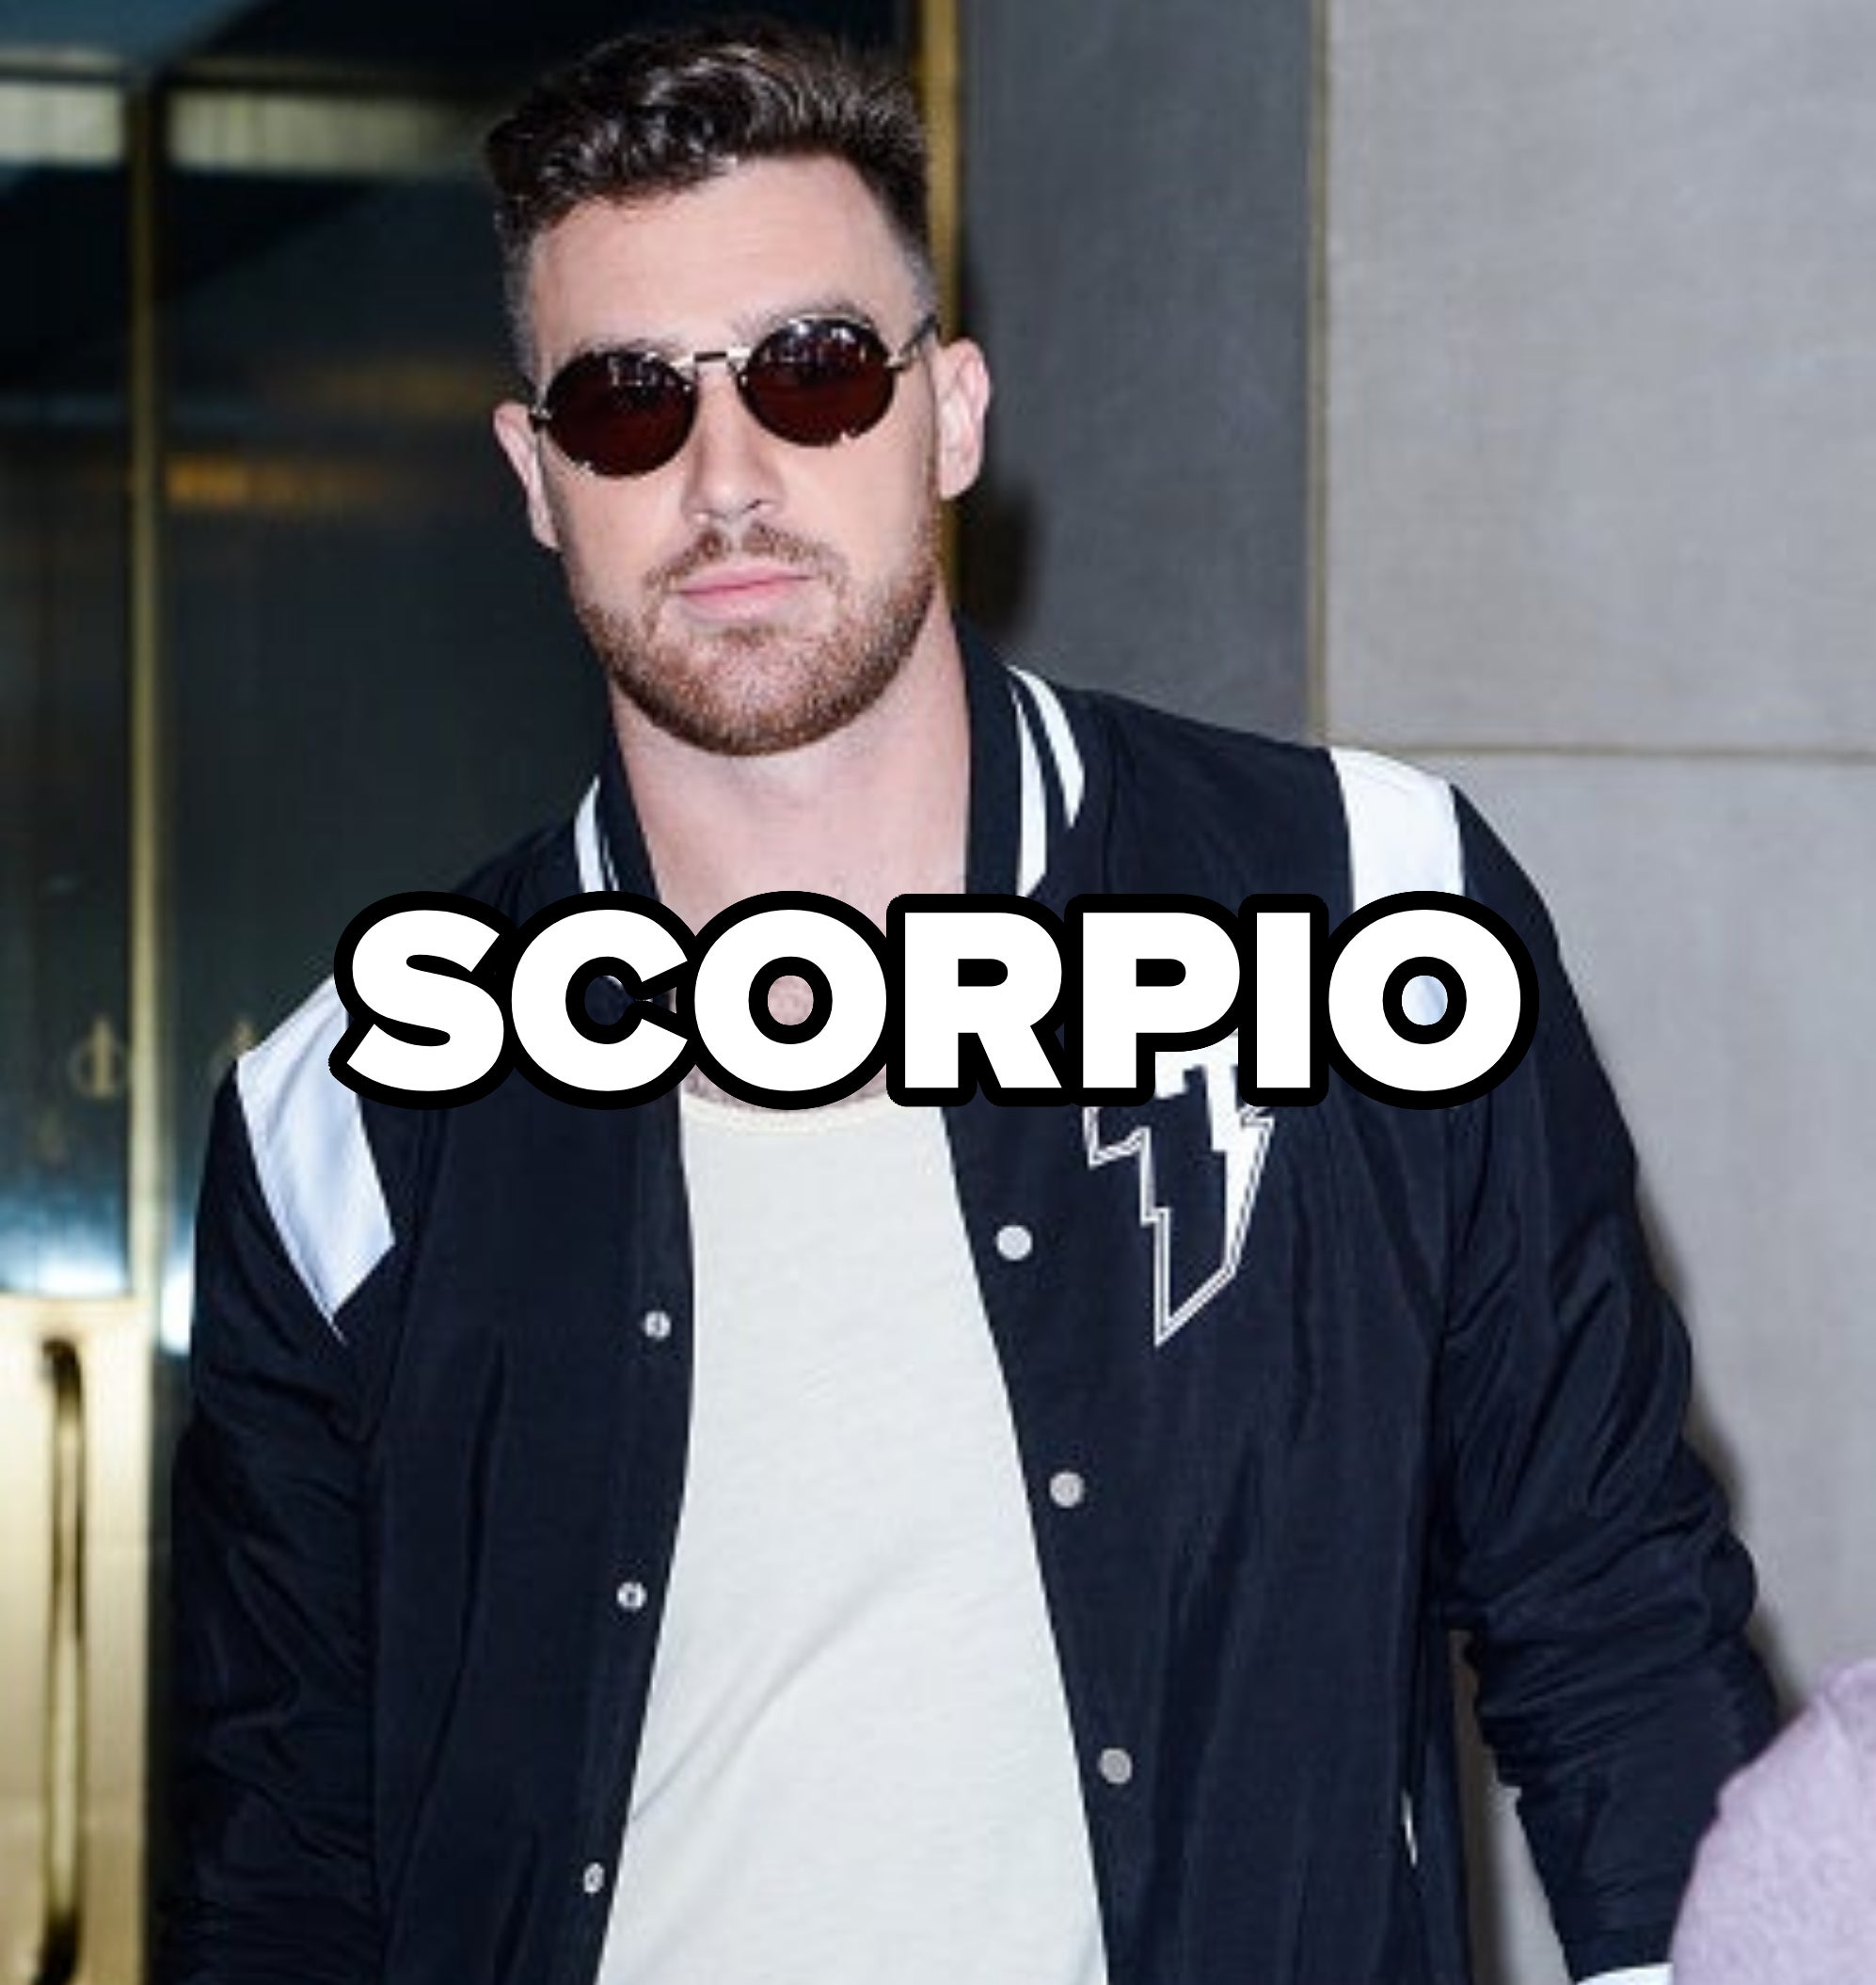 scorpio written over a photo of him at night wearing sunglasses and jacket